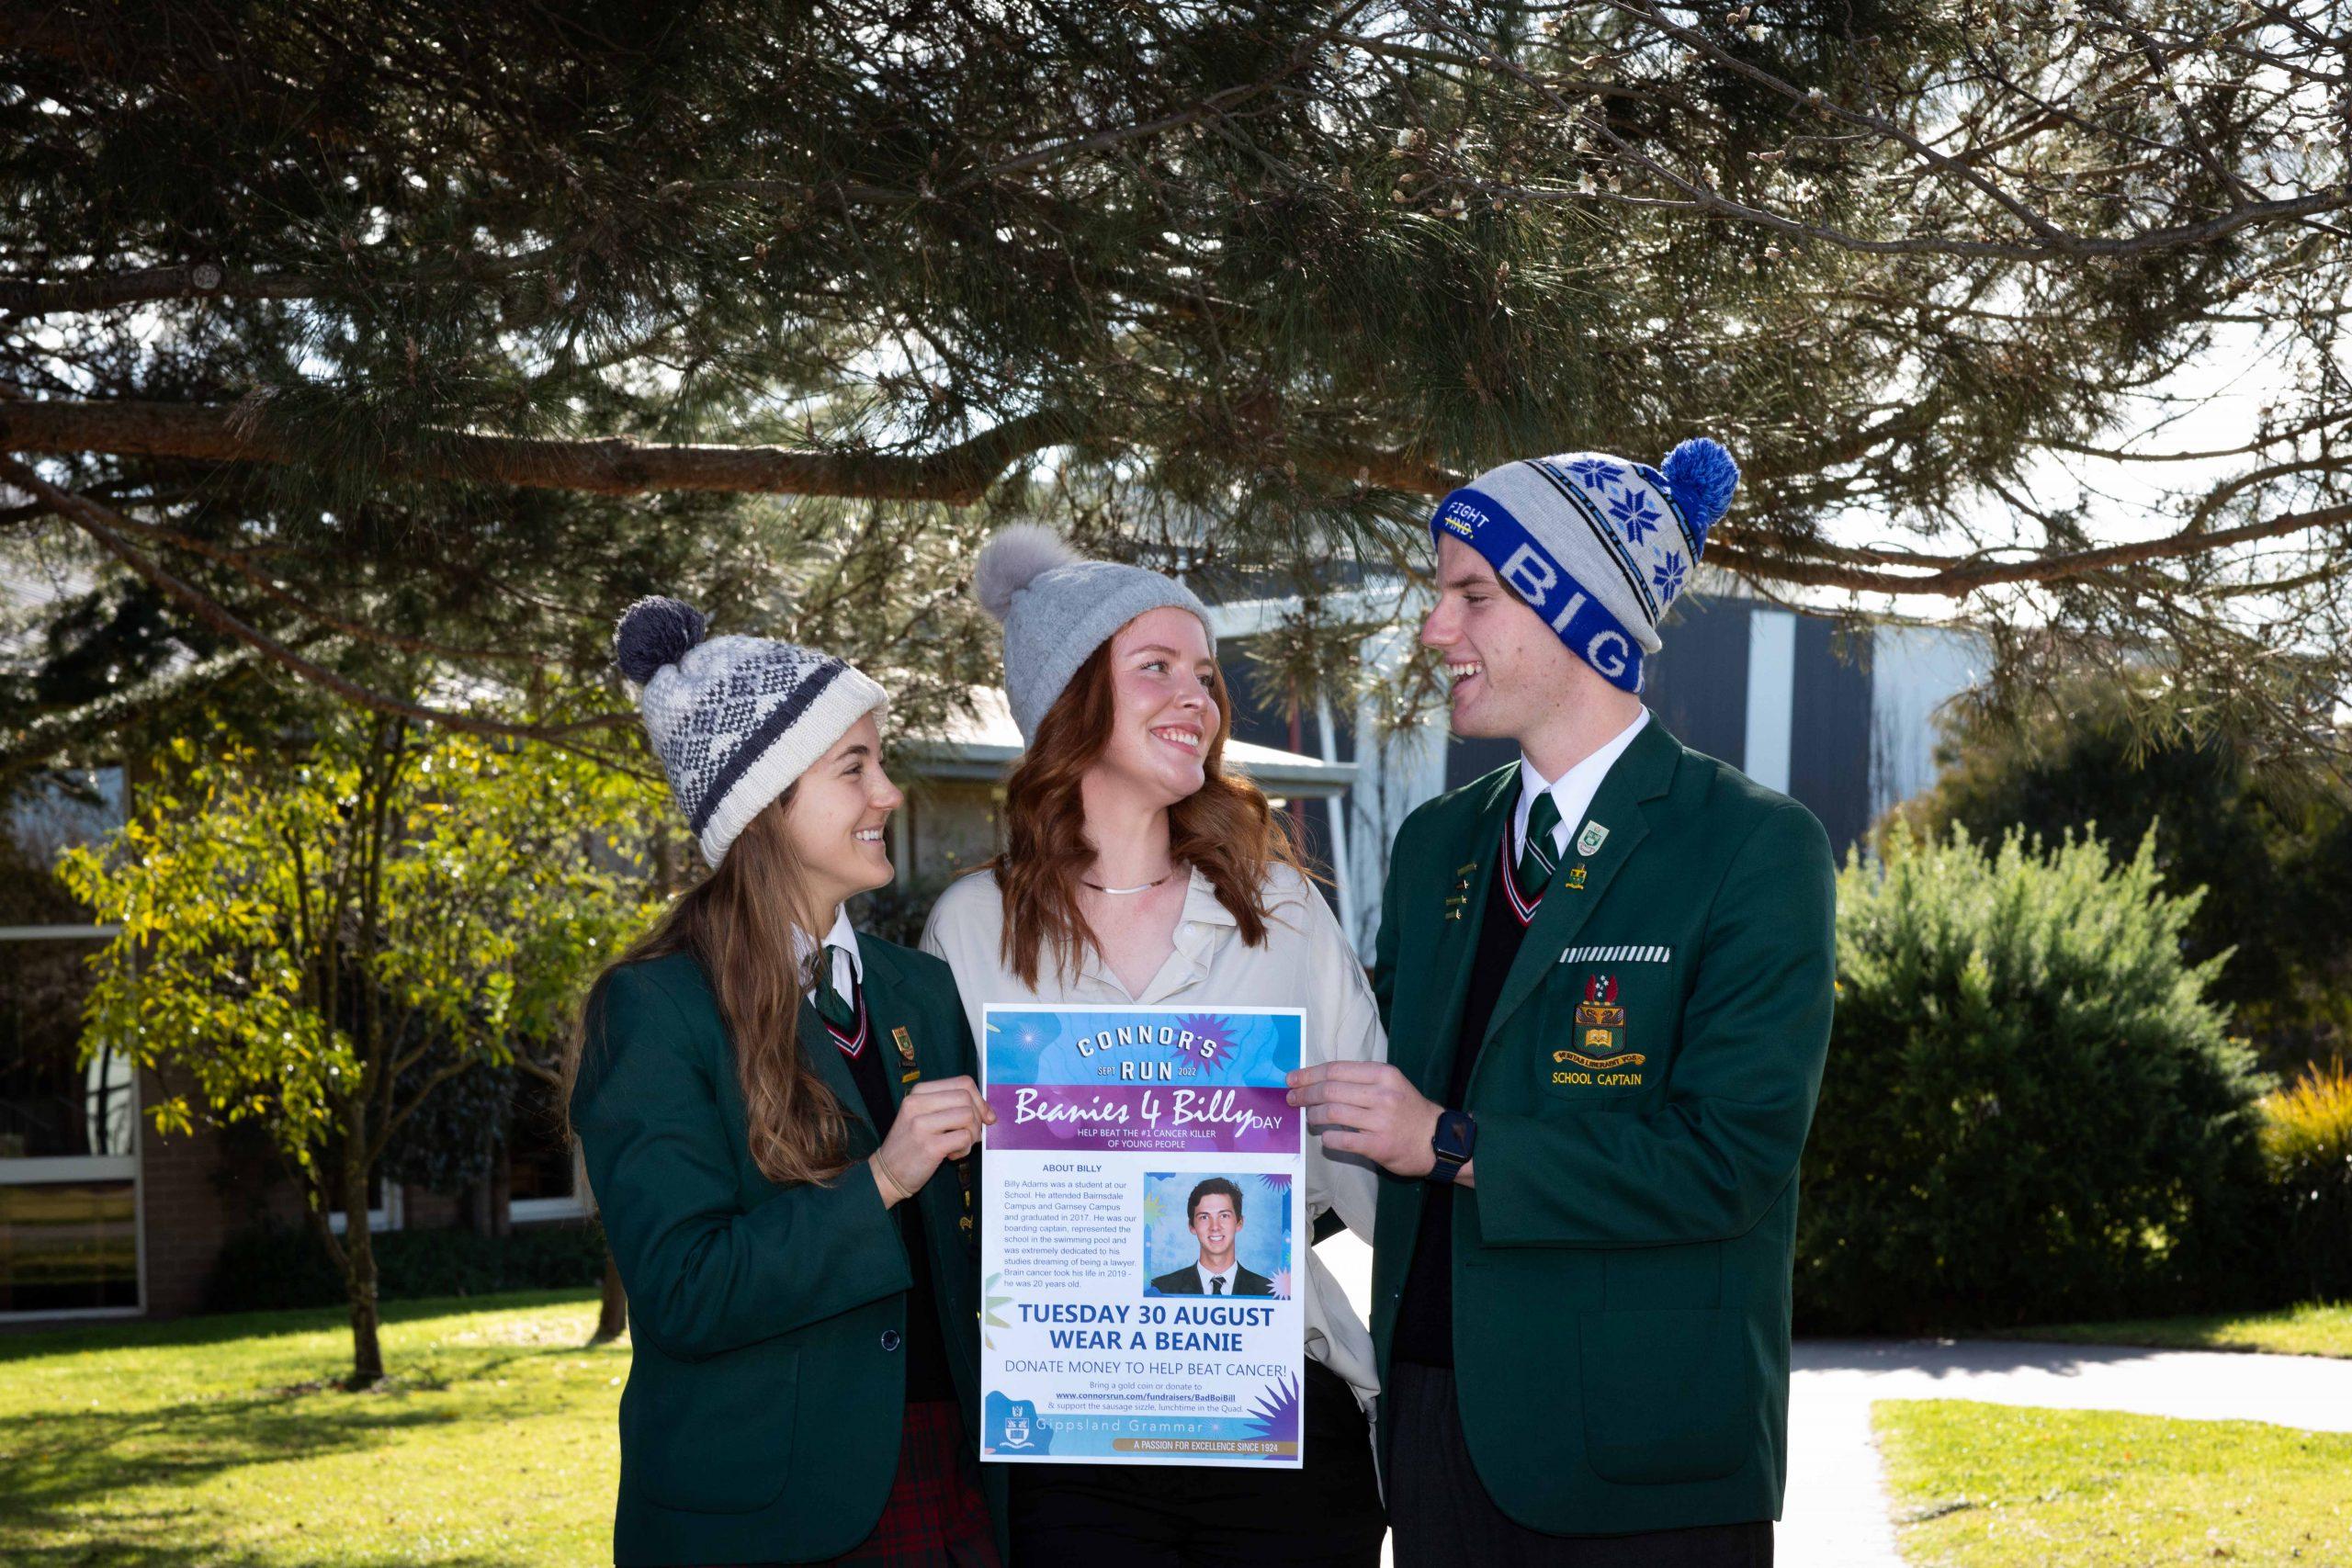 Prefects Lara Hall and Rory McLeod together with Old Scholar Ella Baker-Horan getting ready for Beanies for Billy Day.